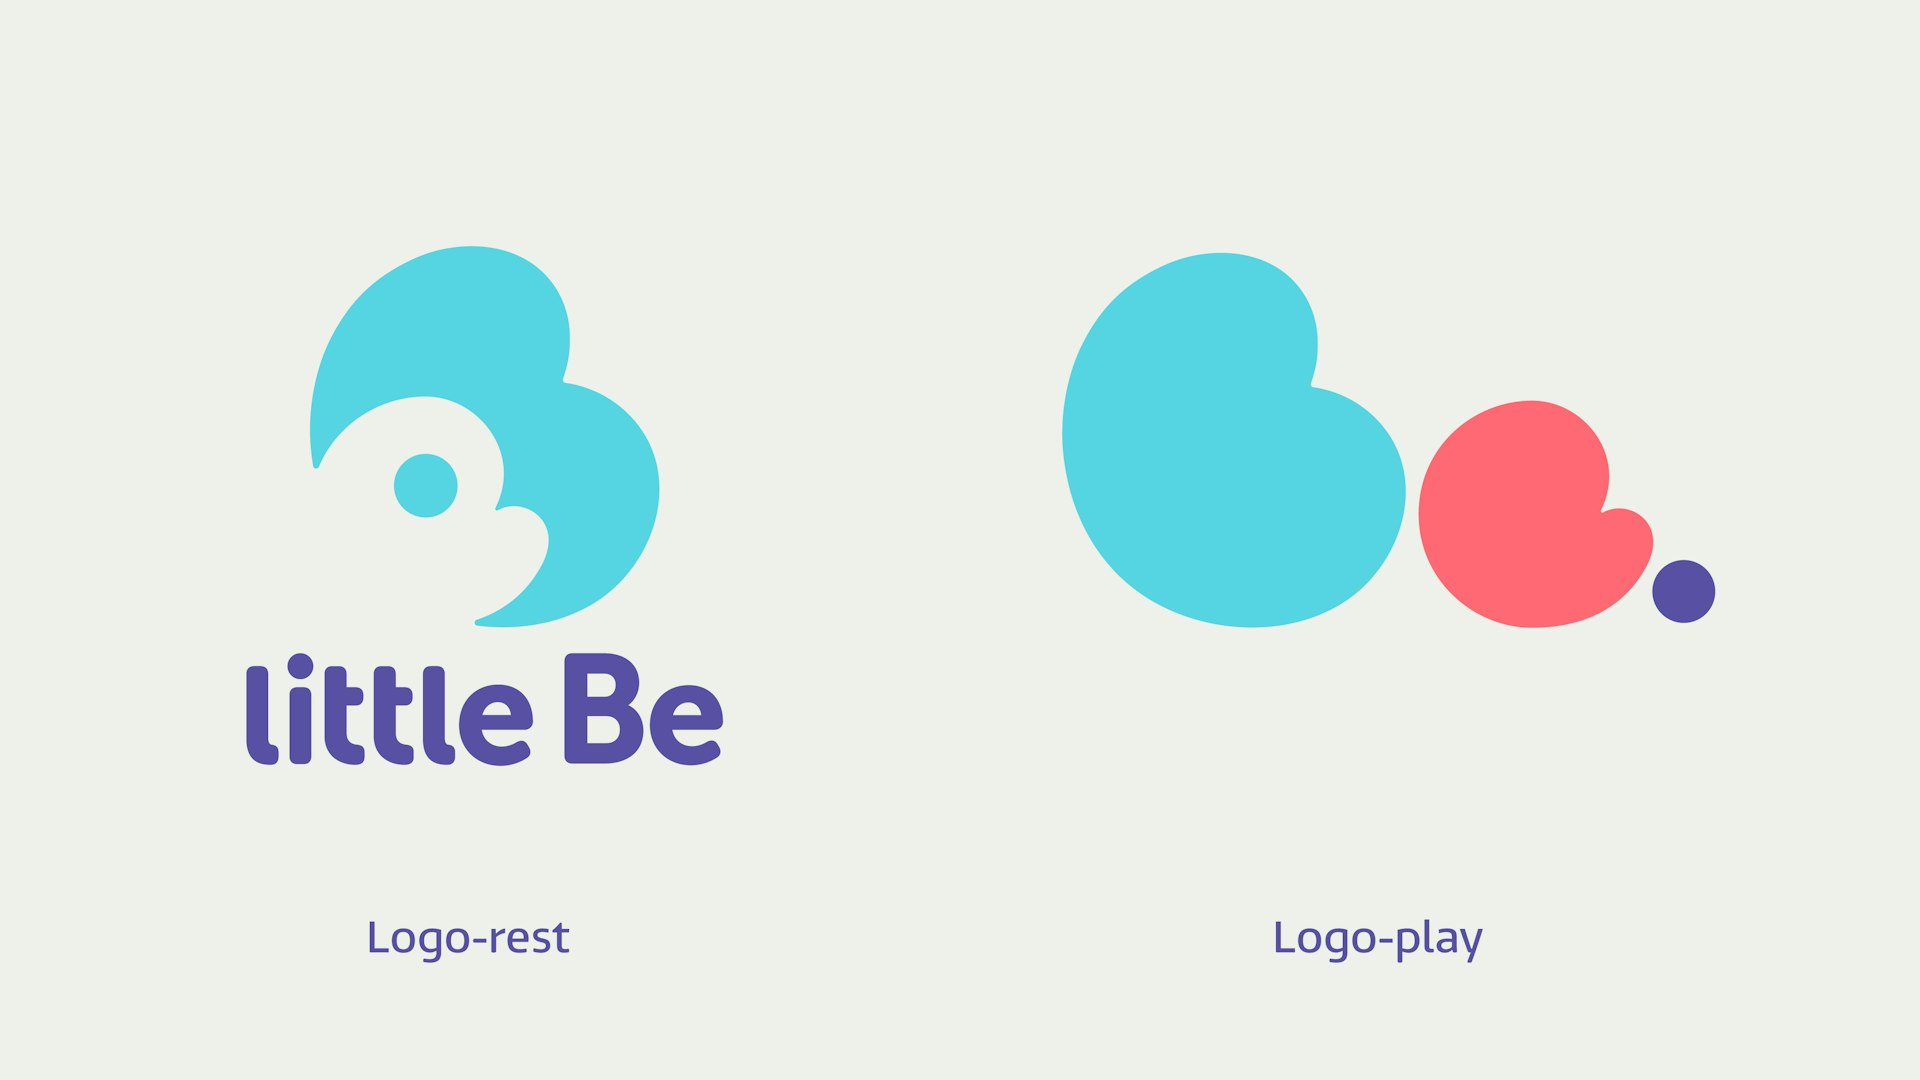 Jason Ford - Little Be logo resting and playing